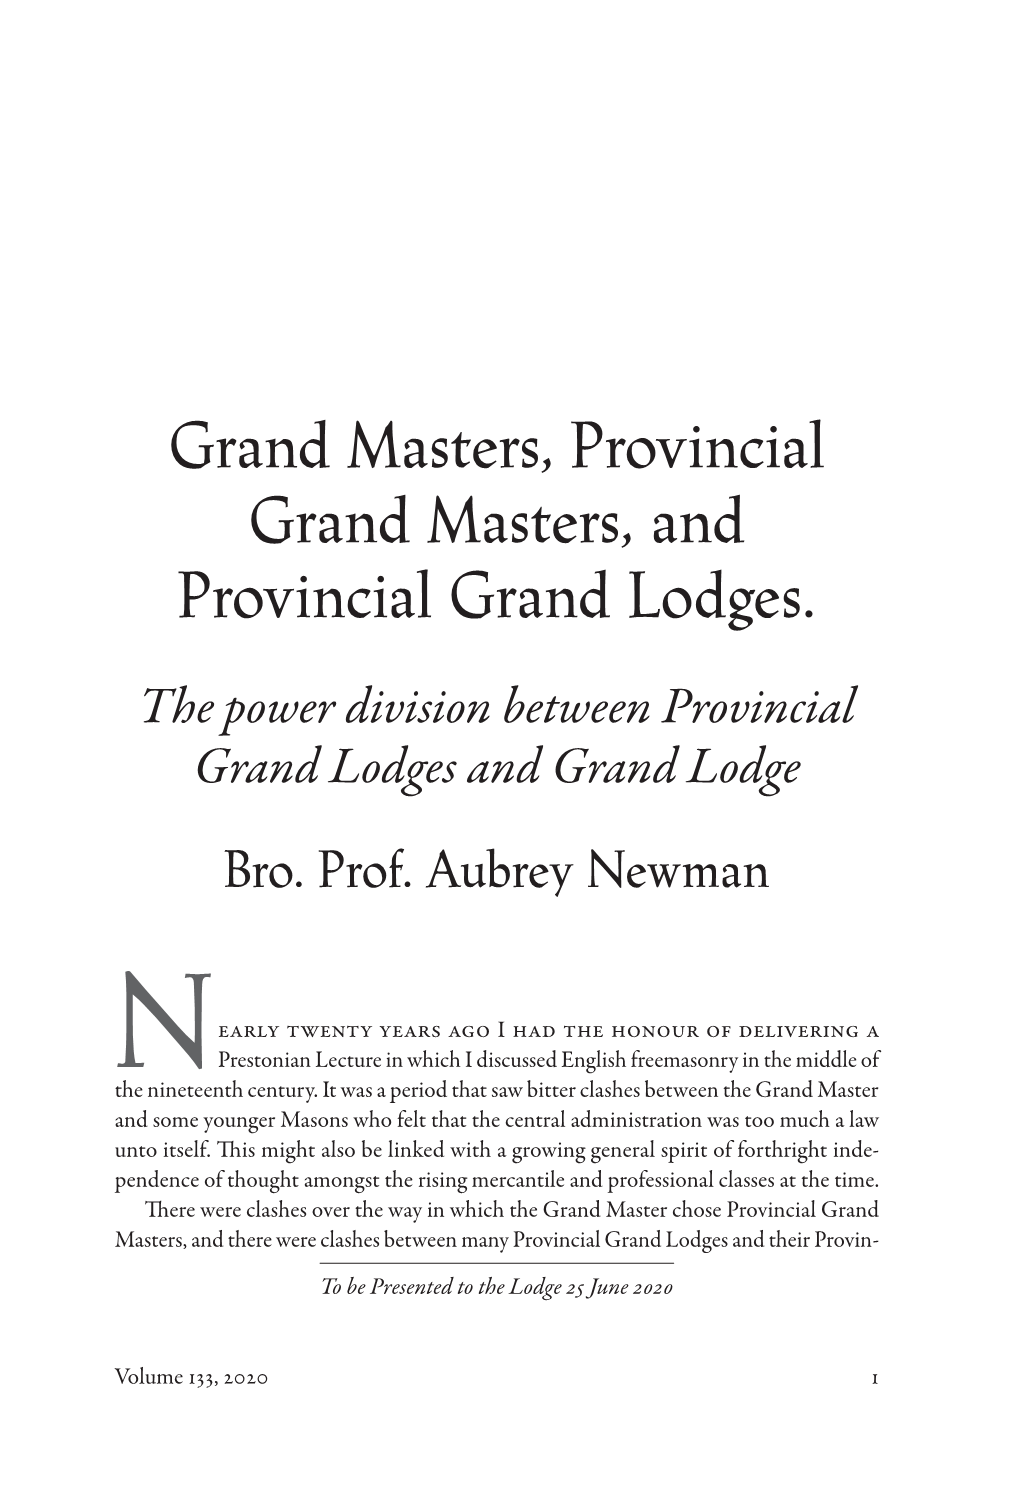 Grand Masters, Provincial Grand Masters, and Provincial Grand Lodges